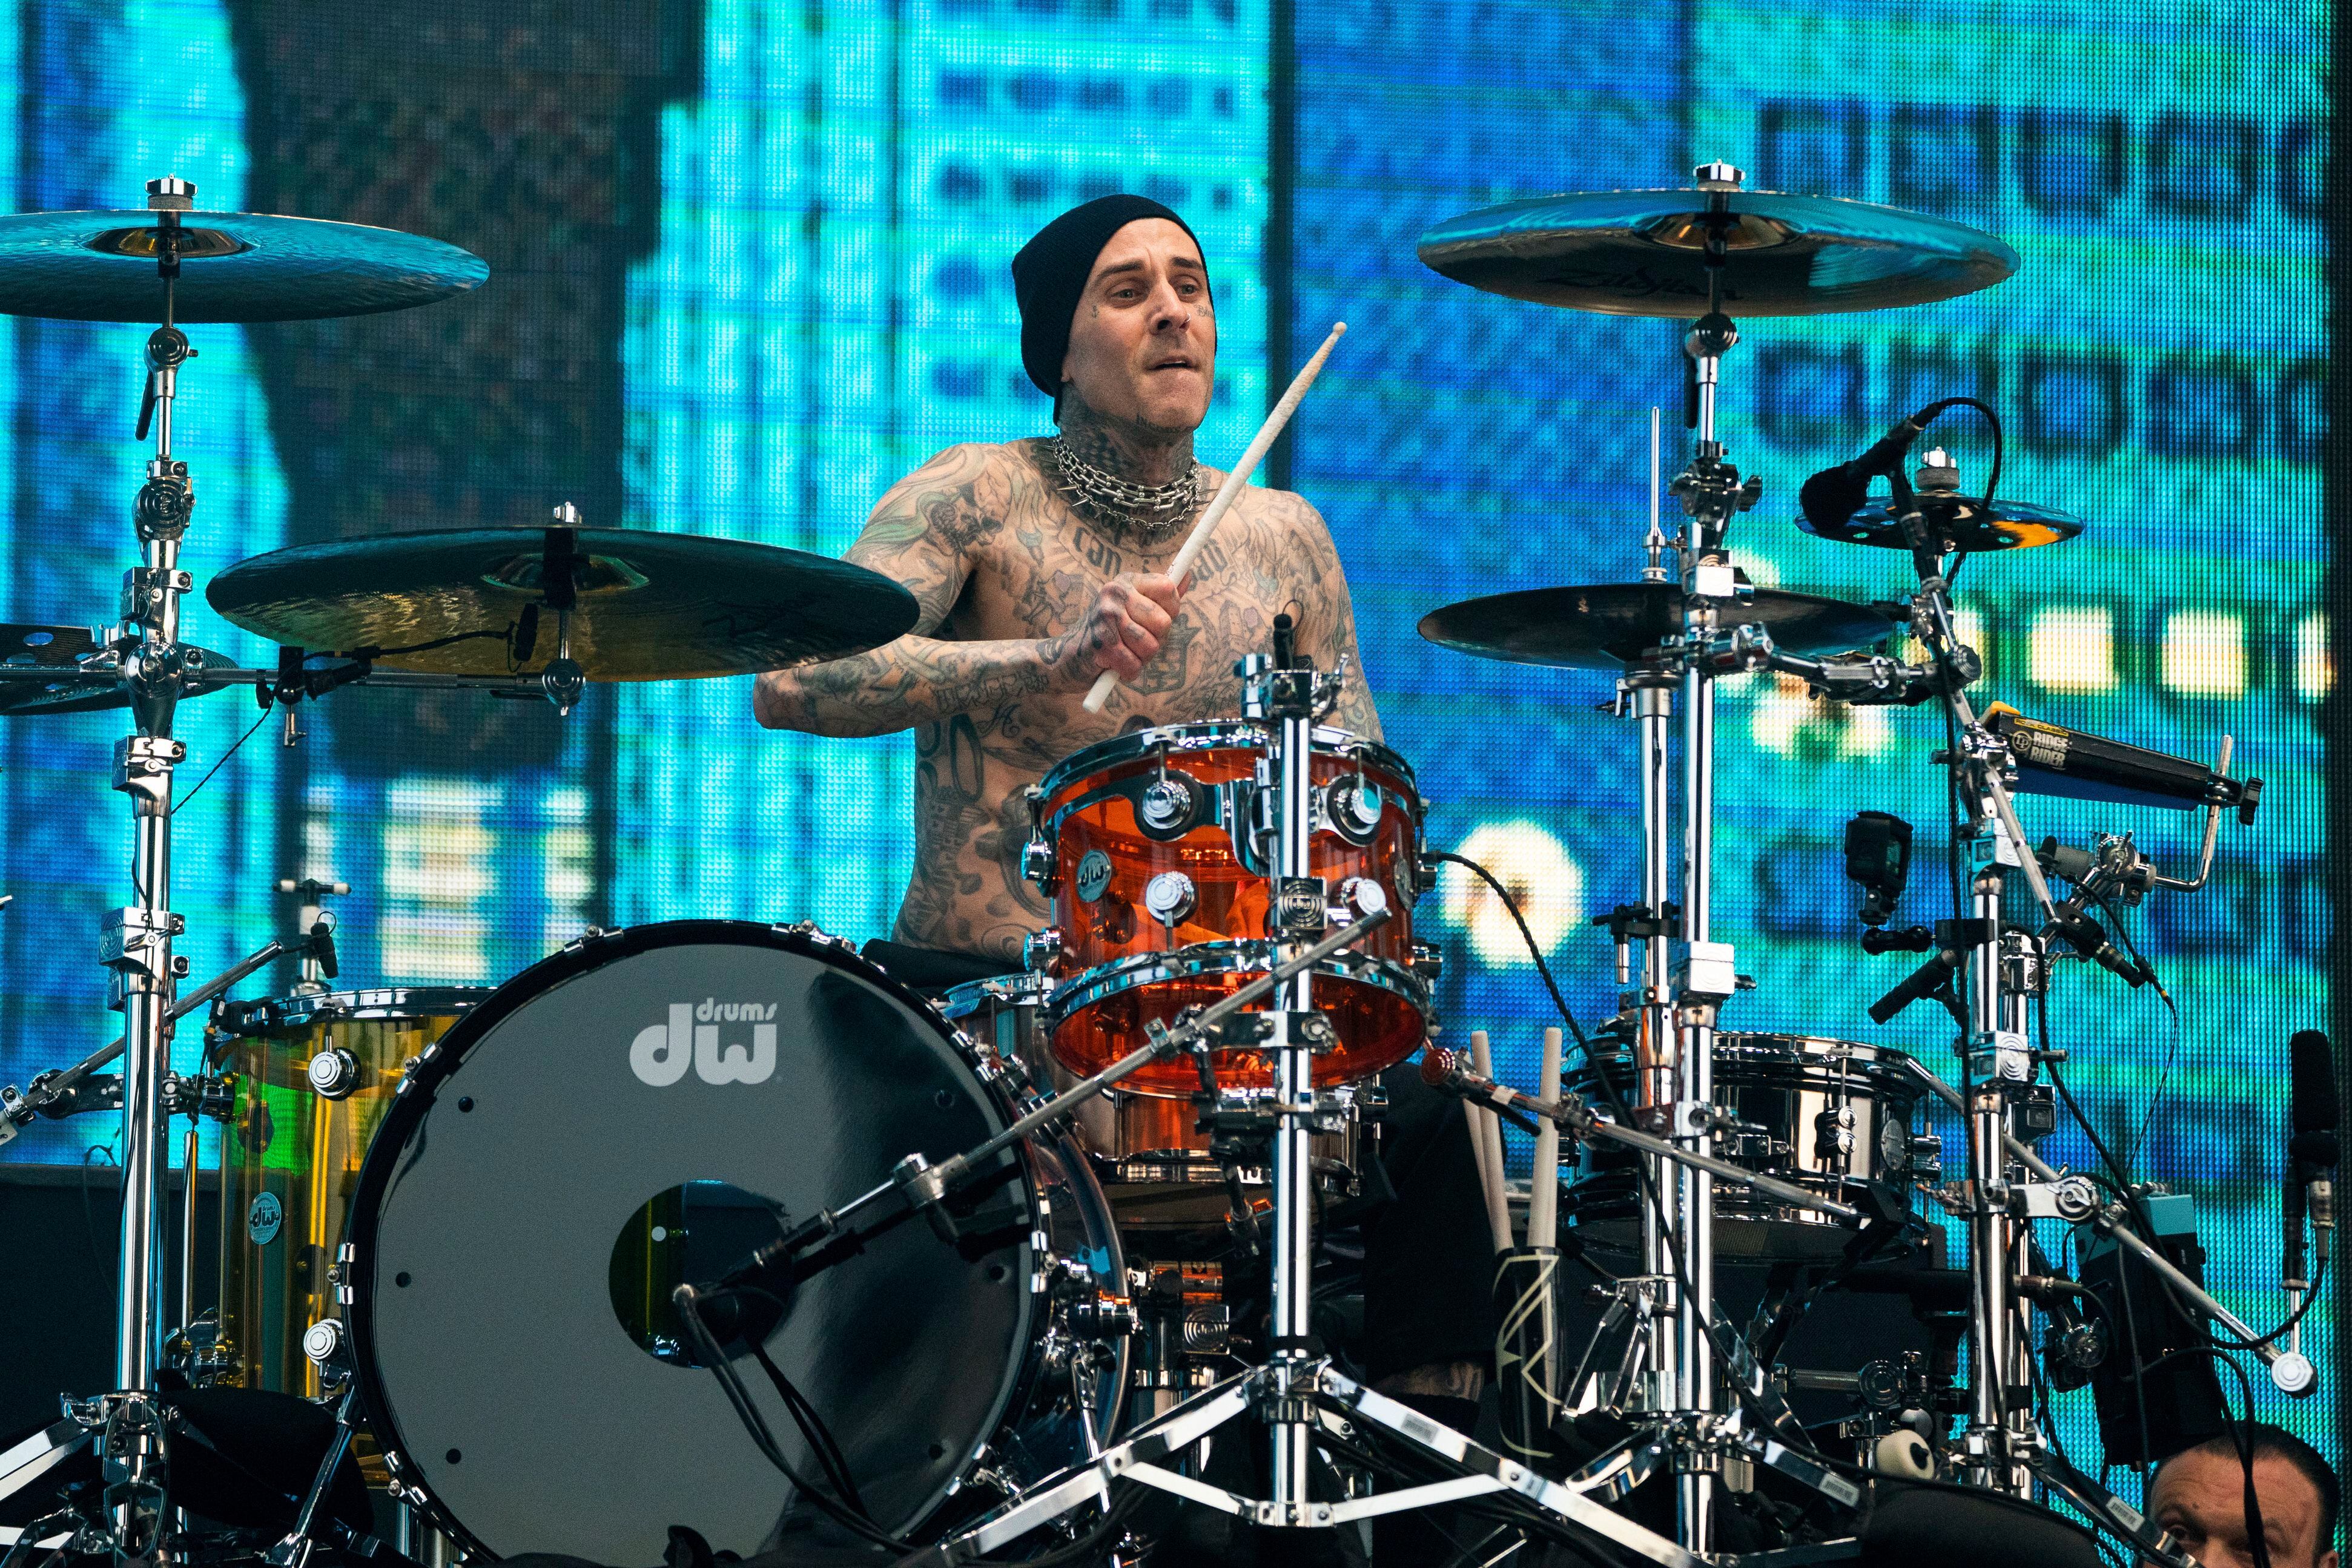 Travis Barker, the drummer for Blink-182, at day one of  Coachella.